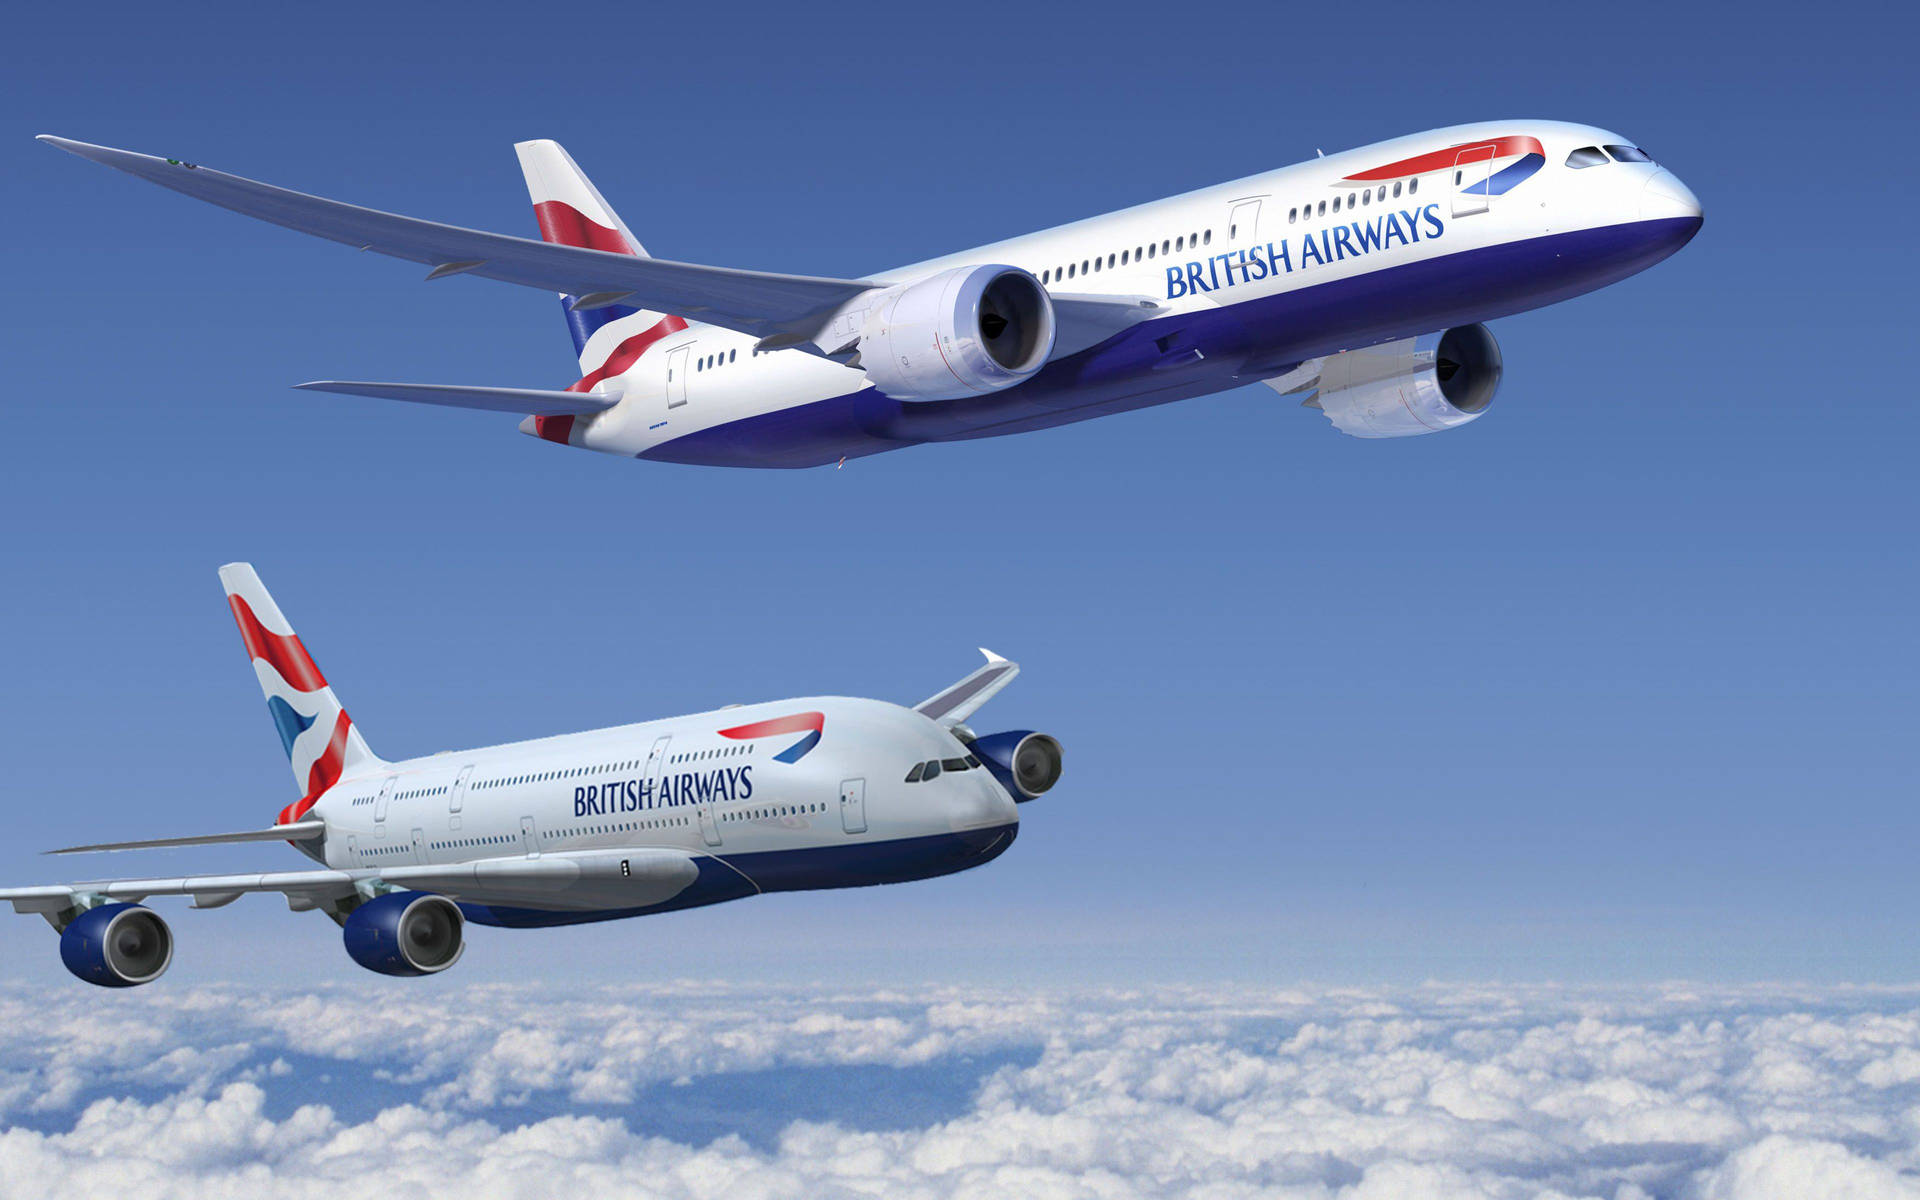 Two Airplanes From British Airways Above Each Other Wallpaper